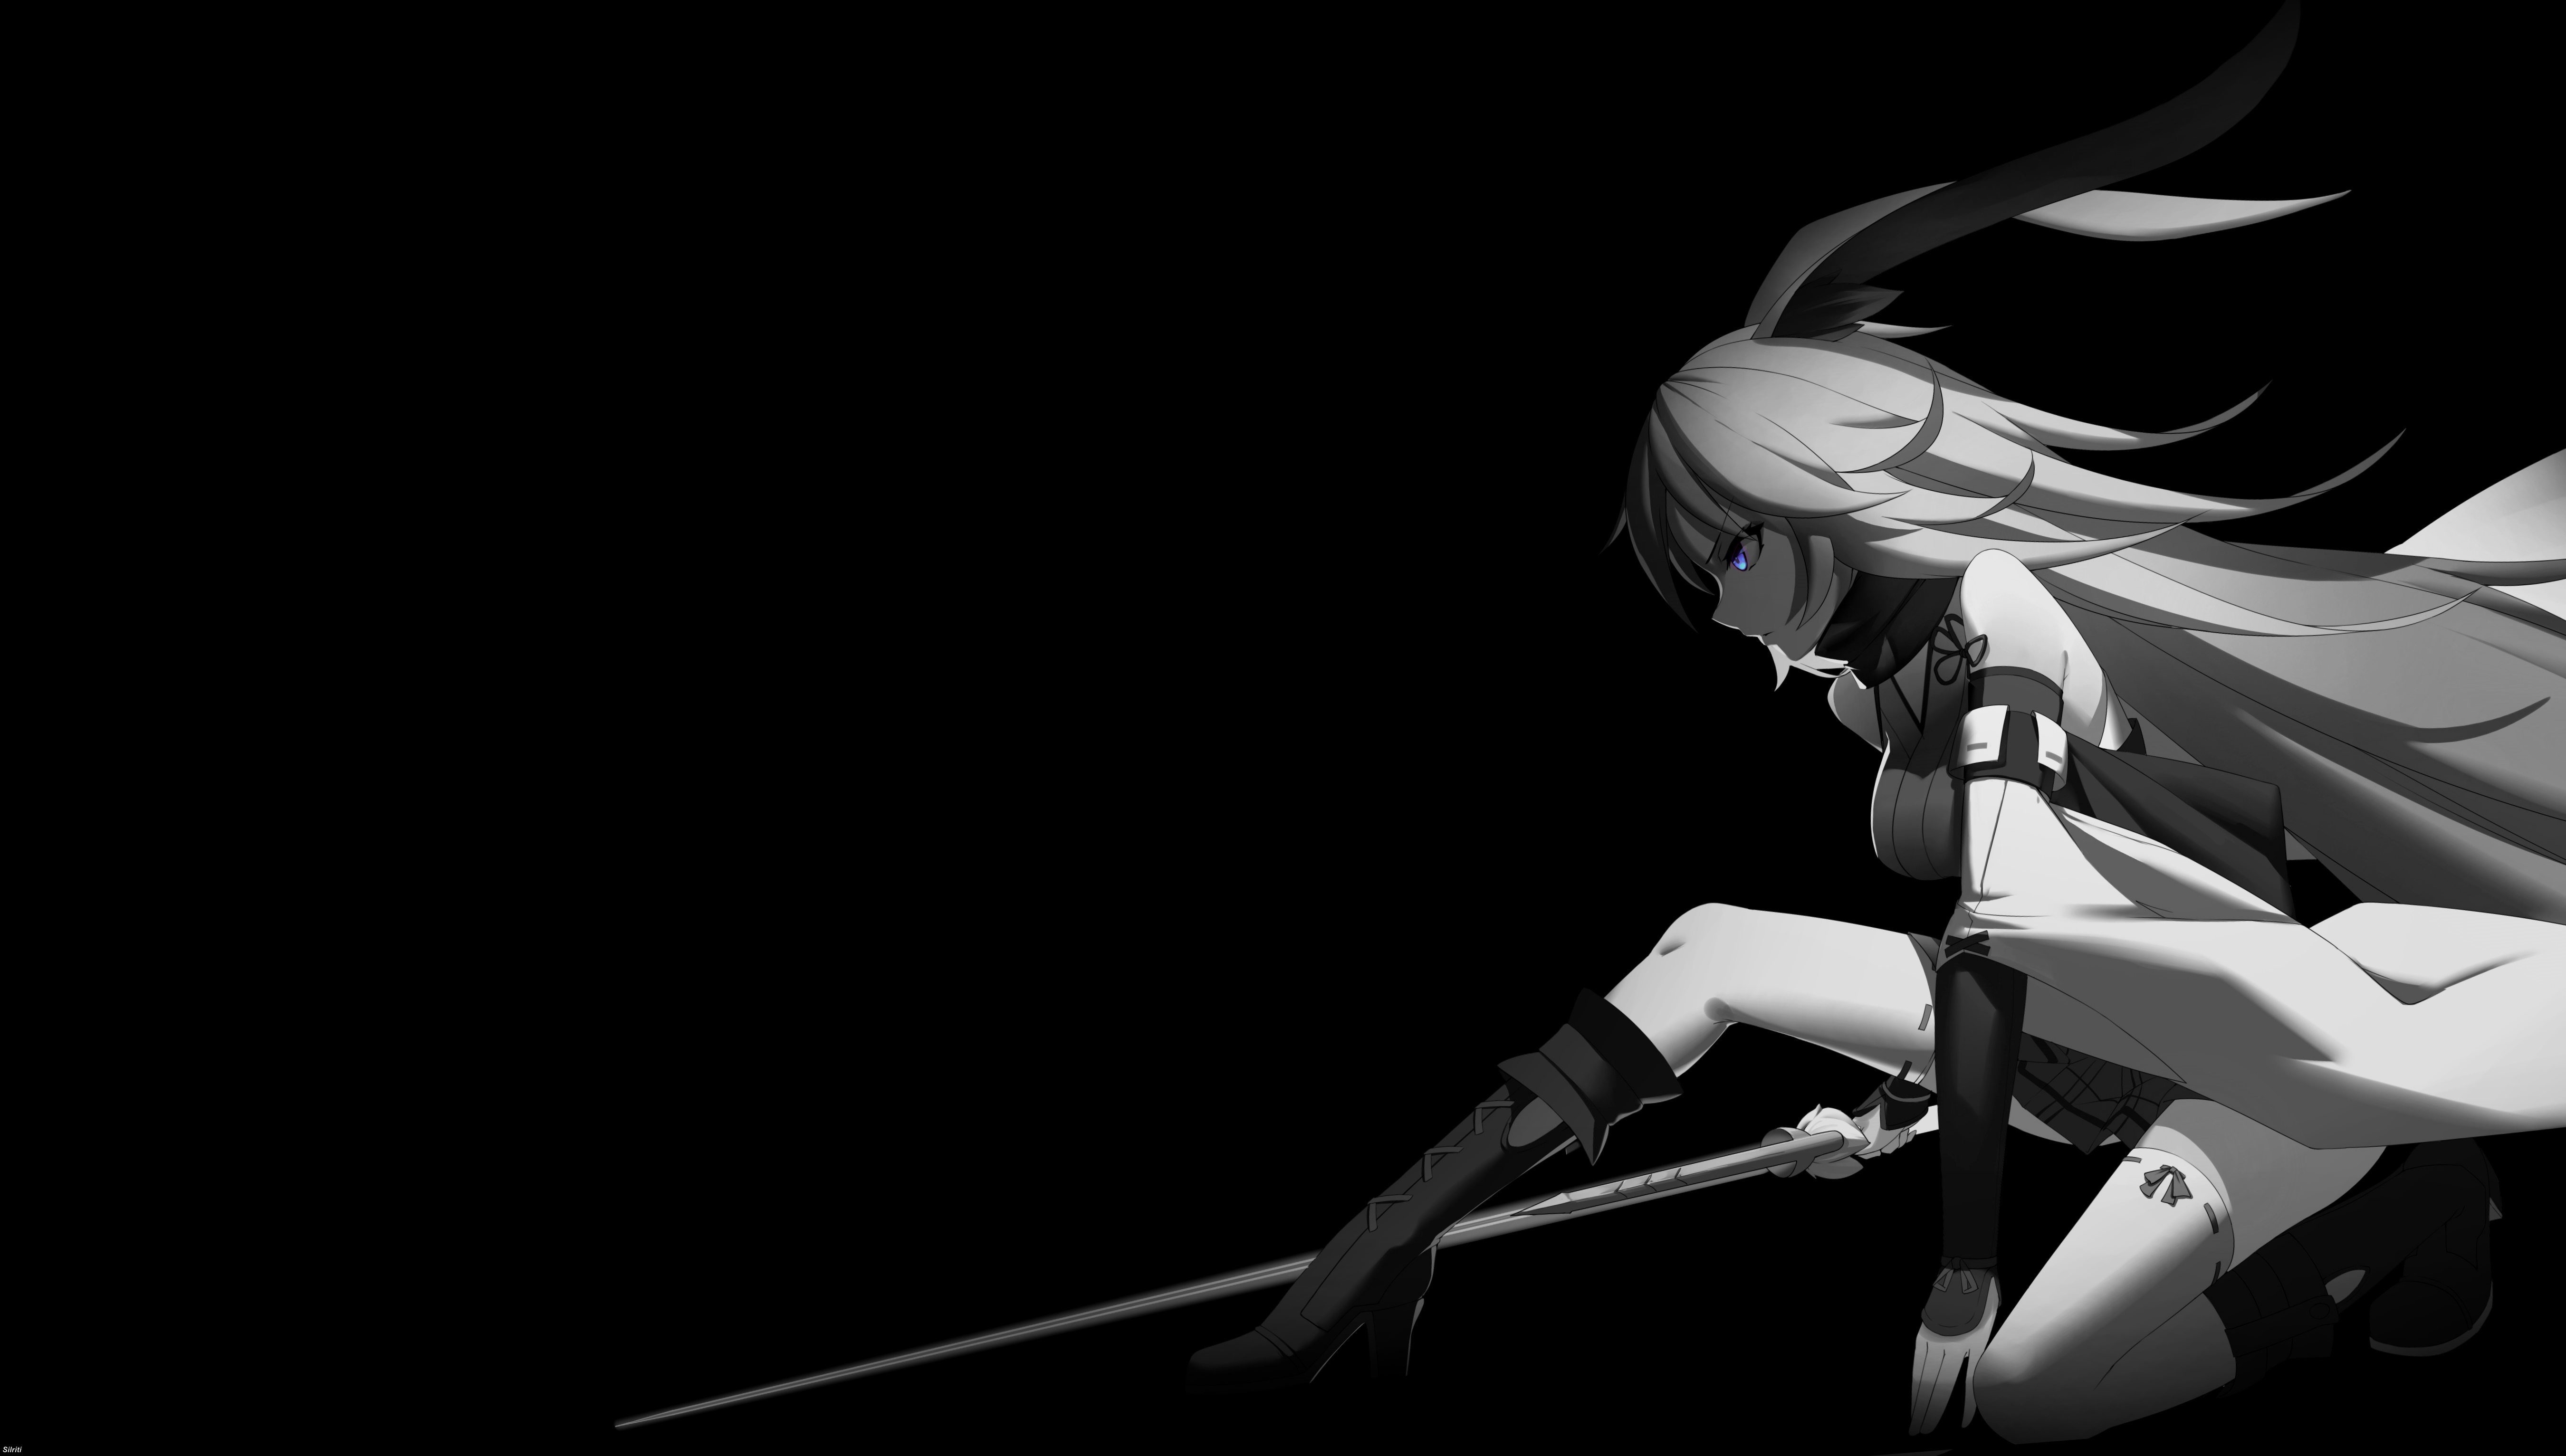 Selective Coloring Dark Background Black Background Simple Background Anime Girls Honkai Impact 3rd  5400x3065